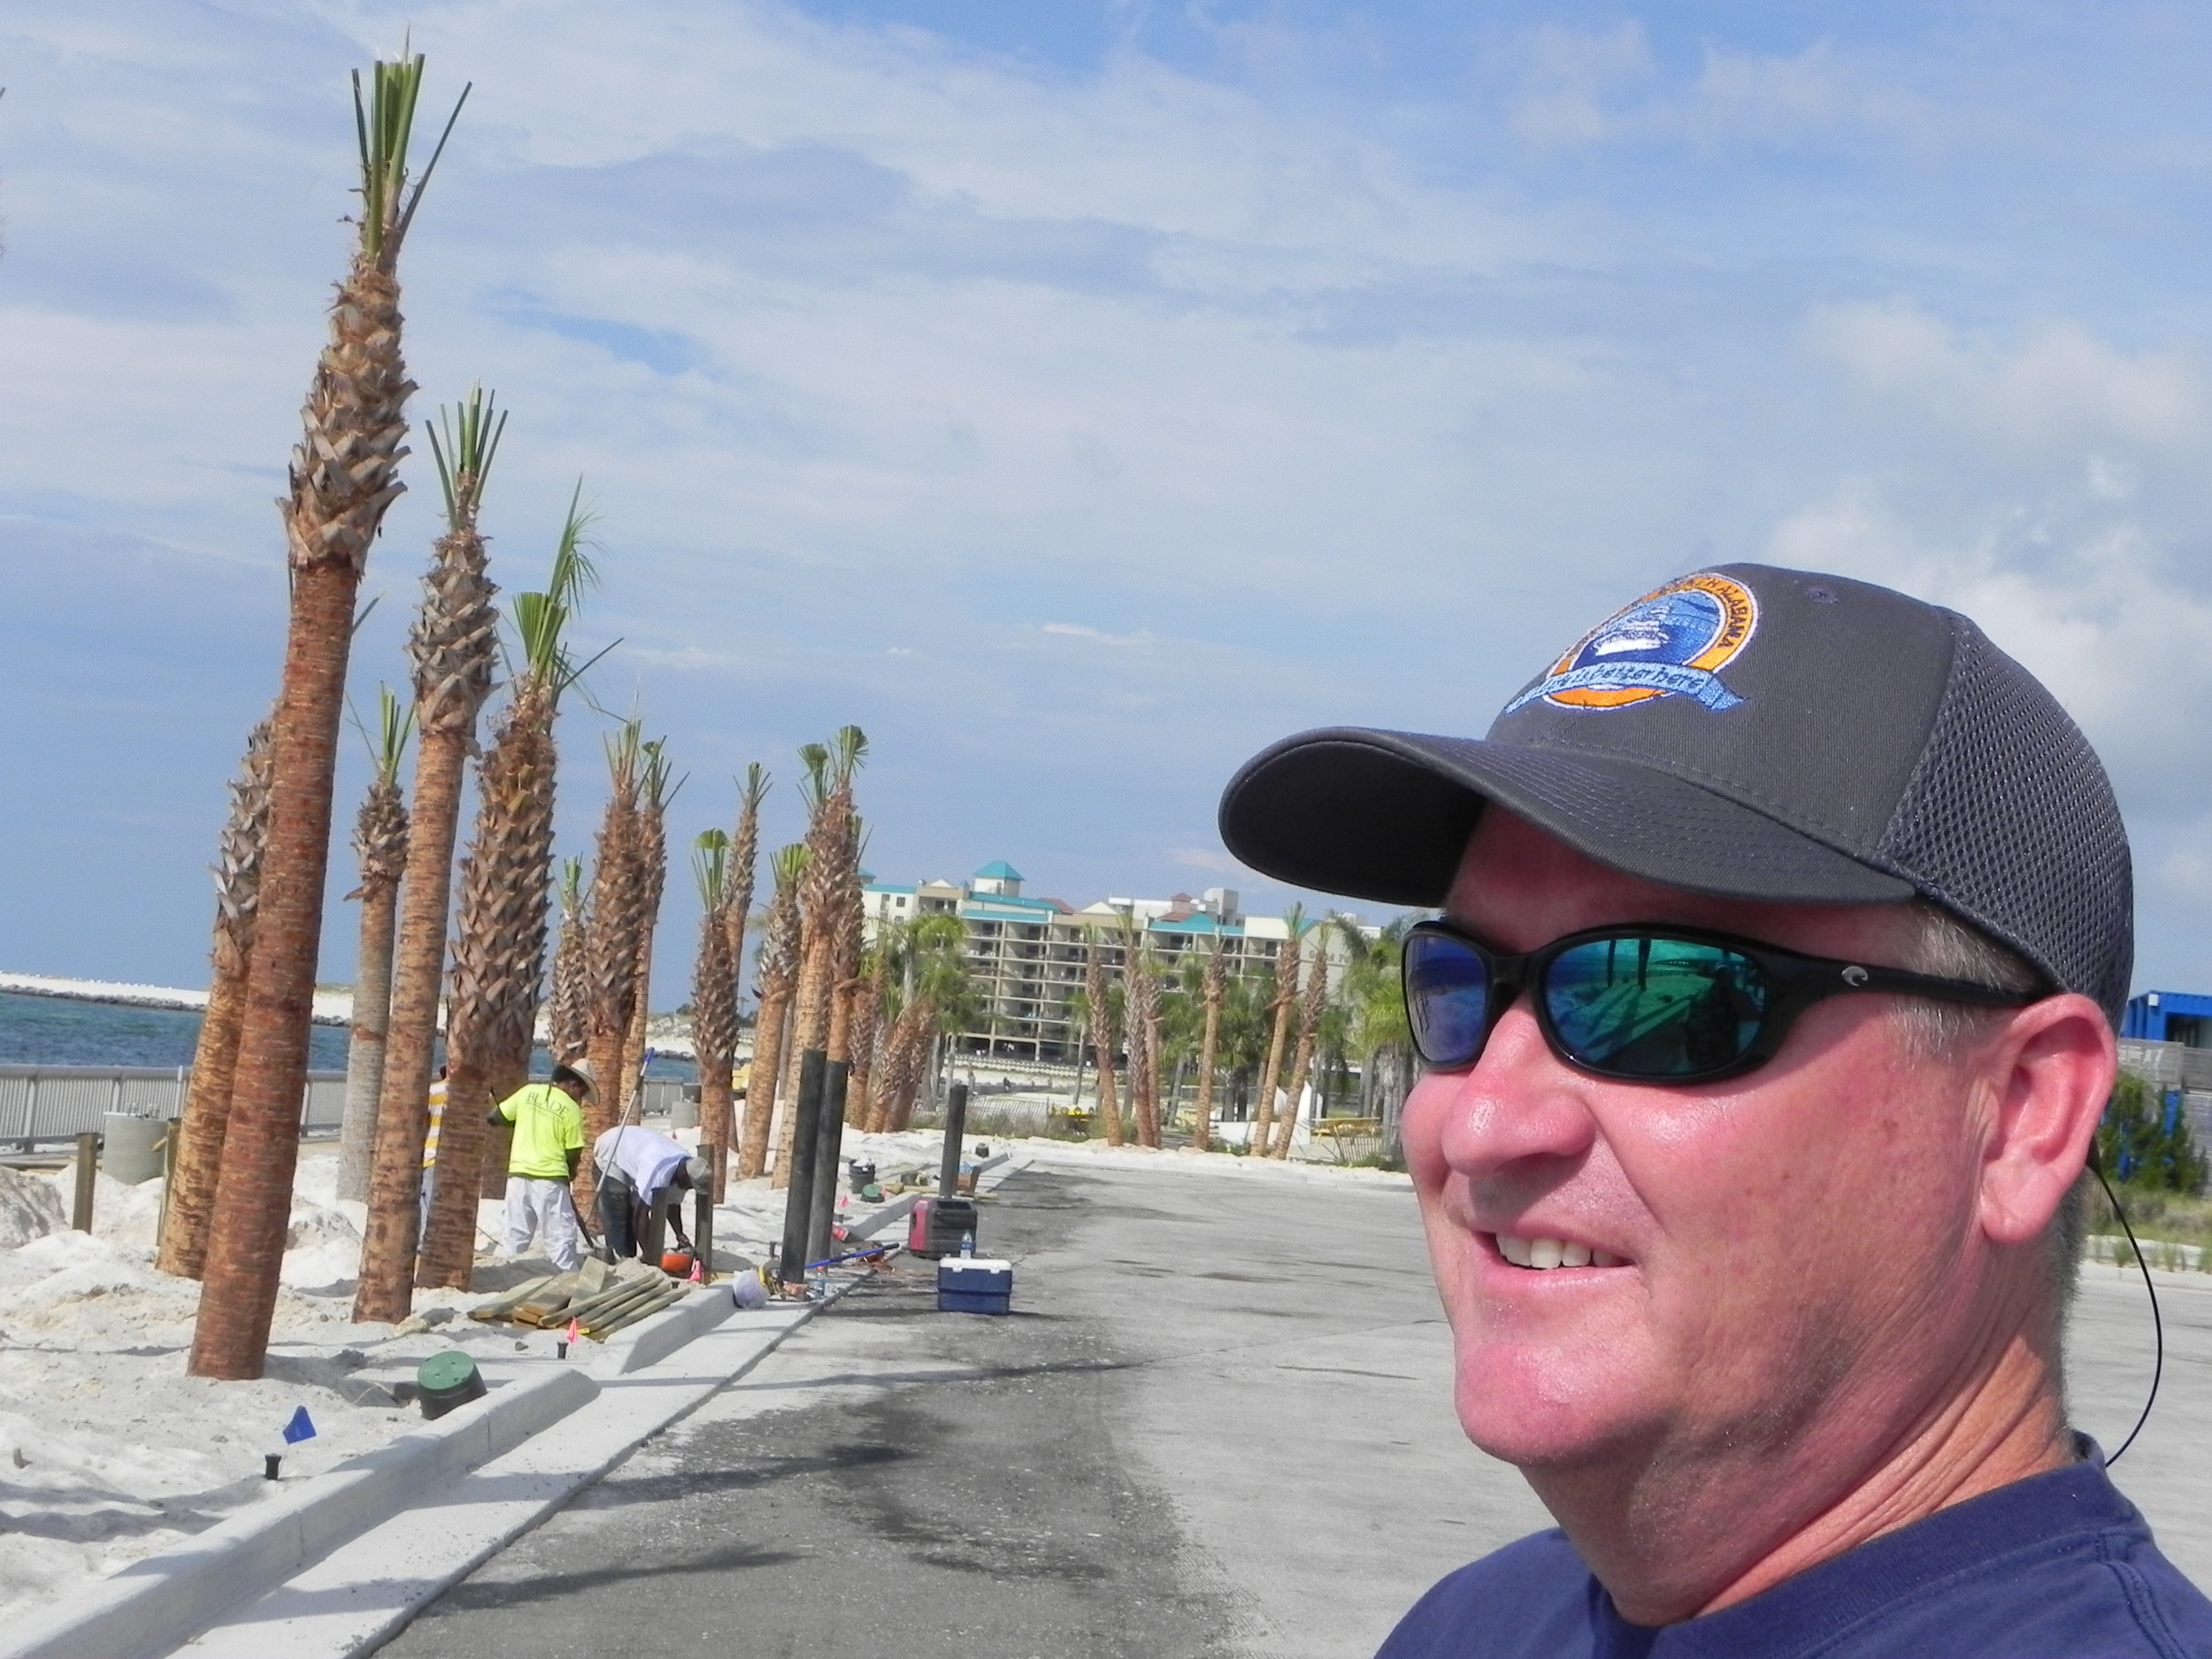 Coastal Resource Manager Phillip West with the City of Orange Beach.